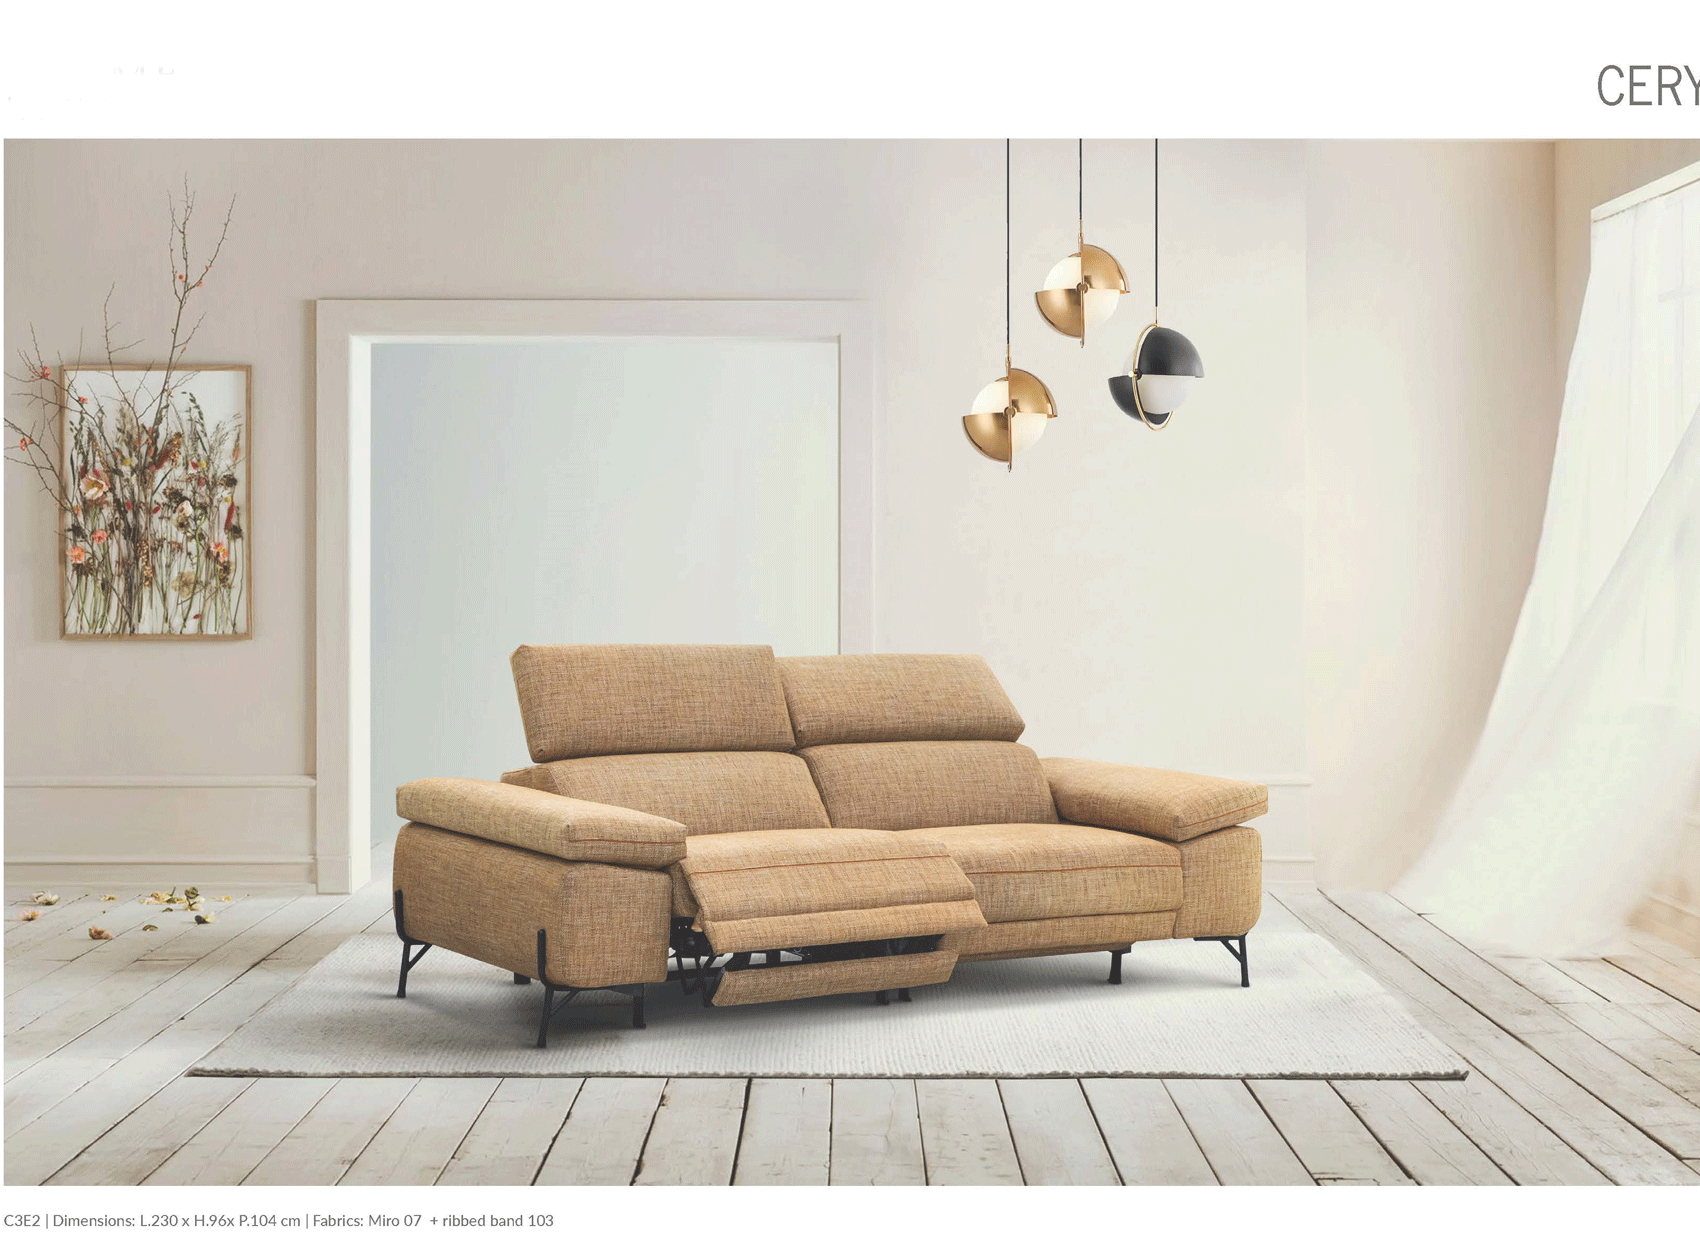 Brands European Living Collection Cery Sofa w/recliner